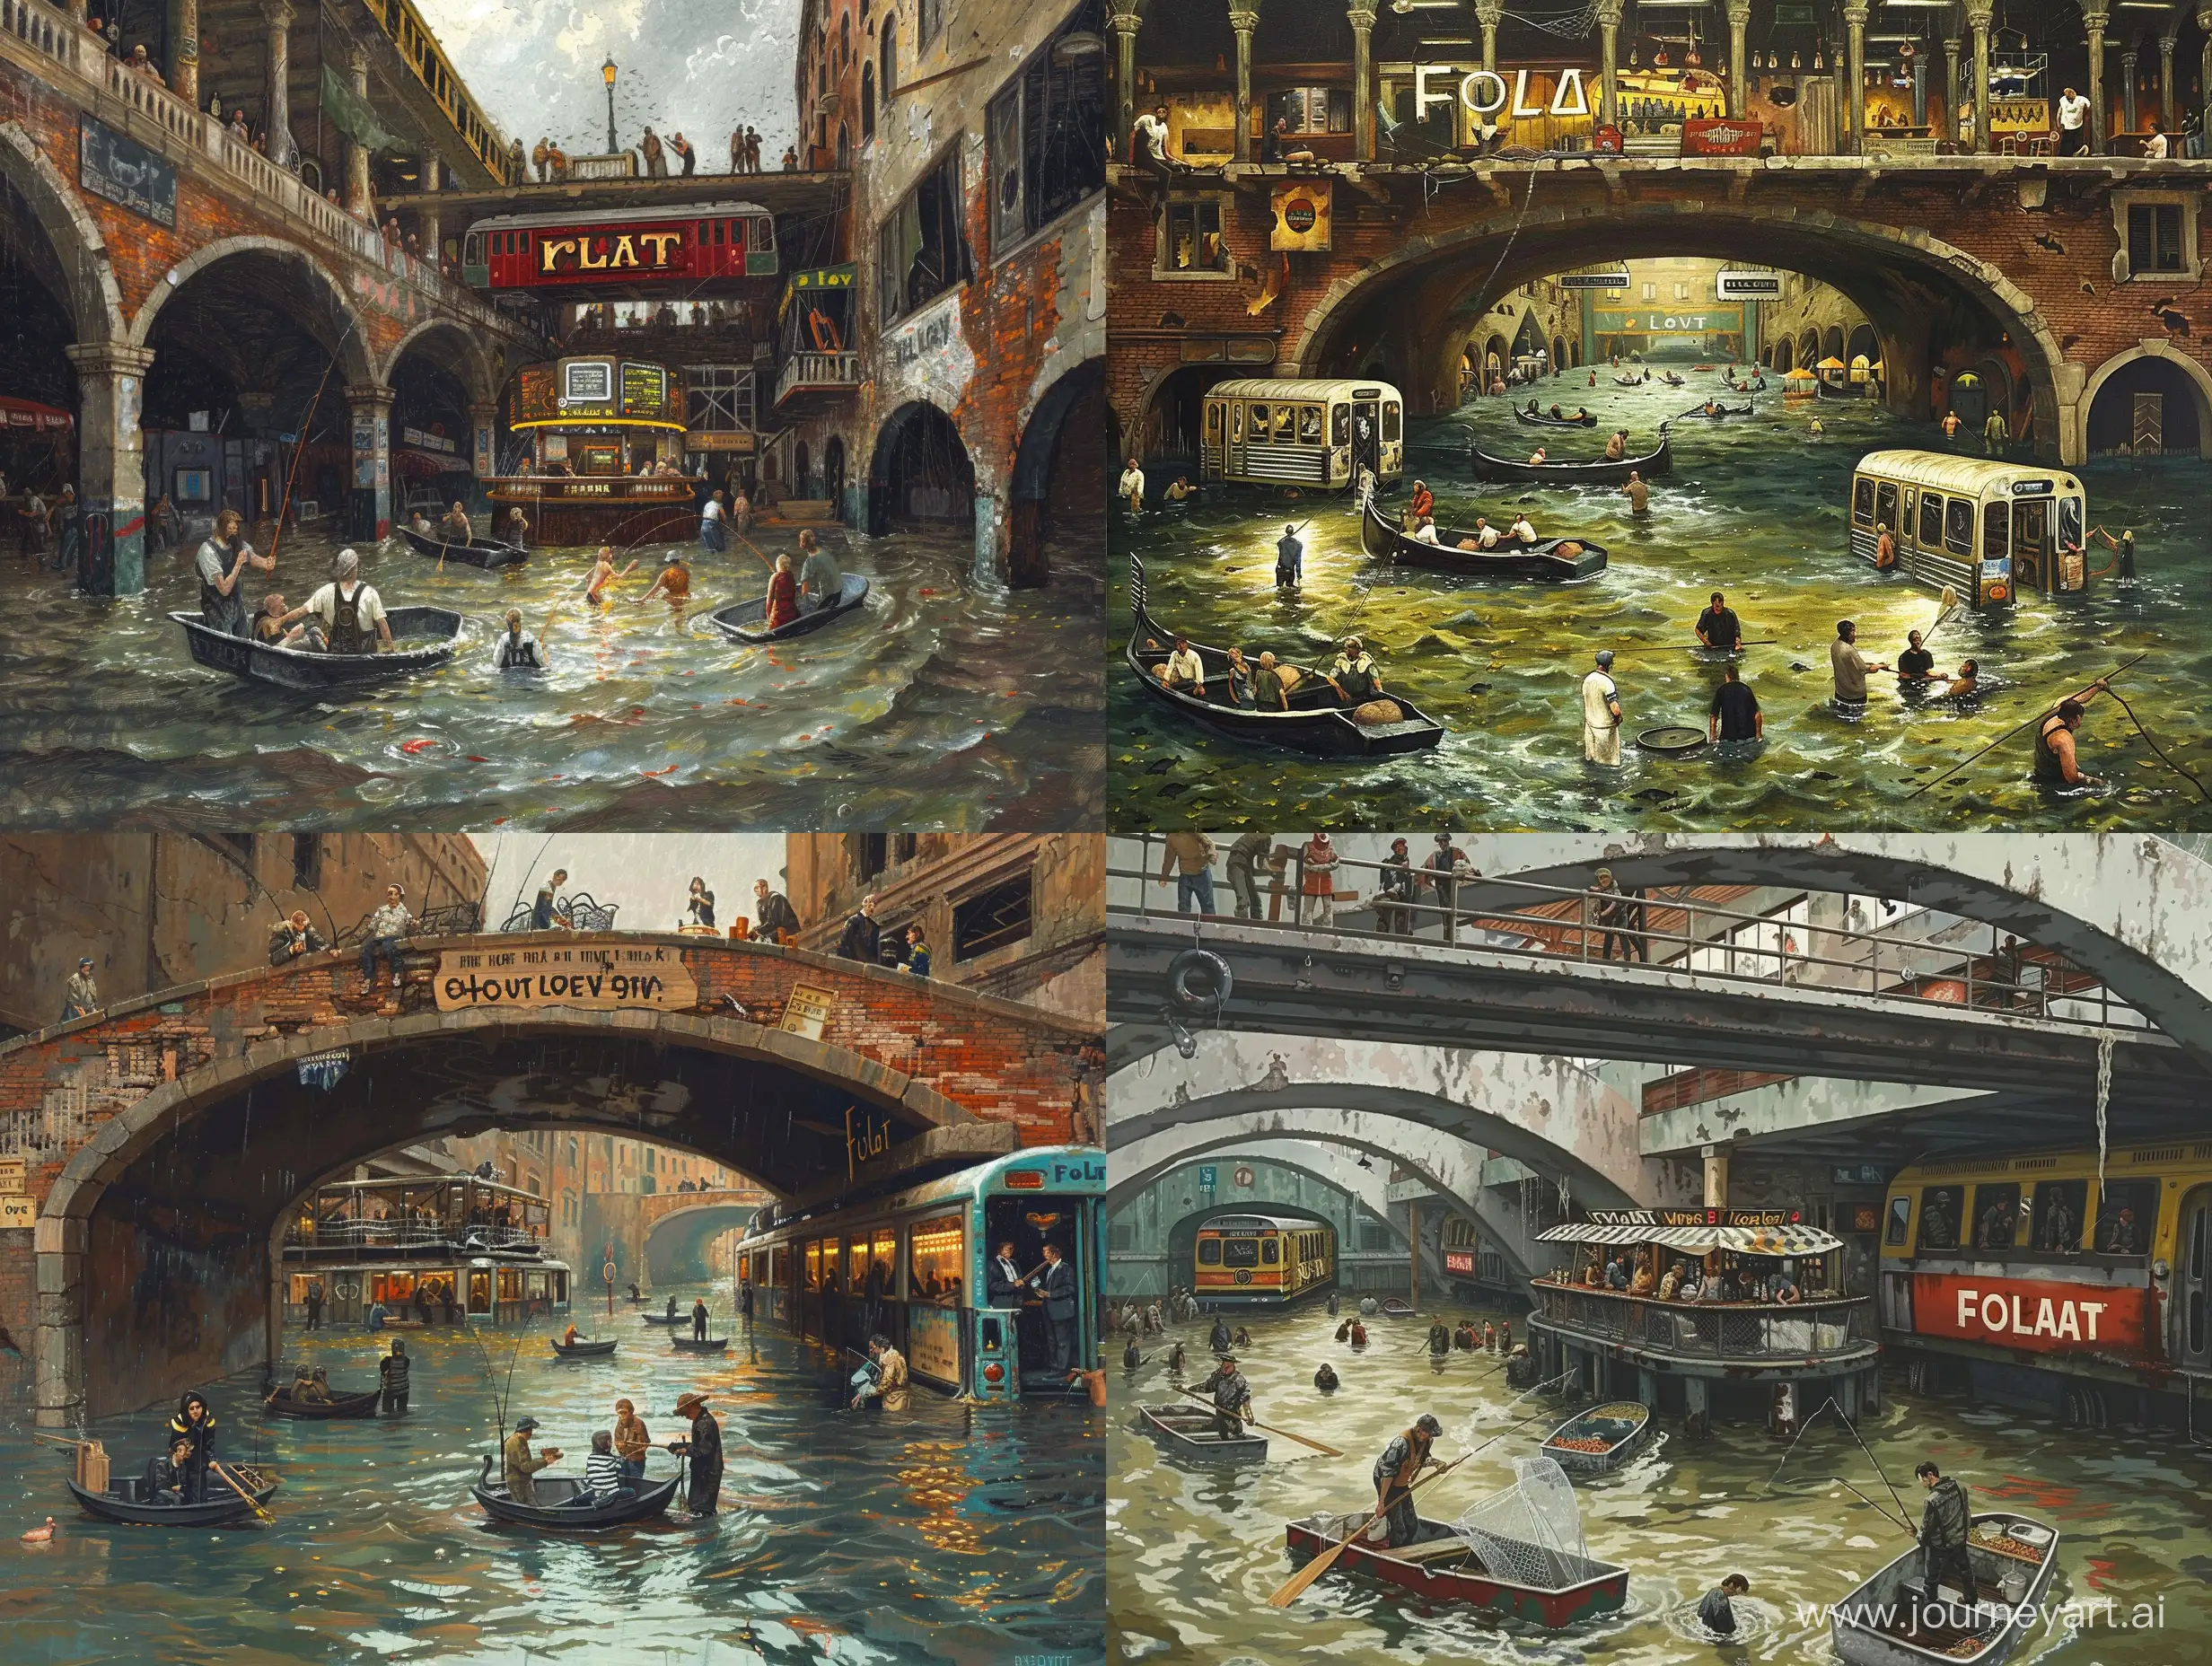 Survivors-Fishing-in-Flooded-Venice-Station-Community-Hope-at-Float-Bar-and-House-of-Love